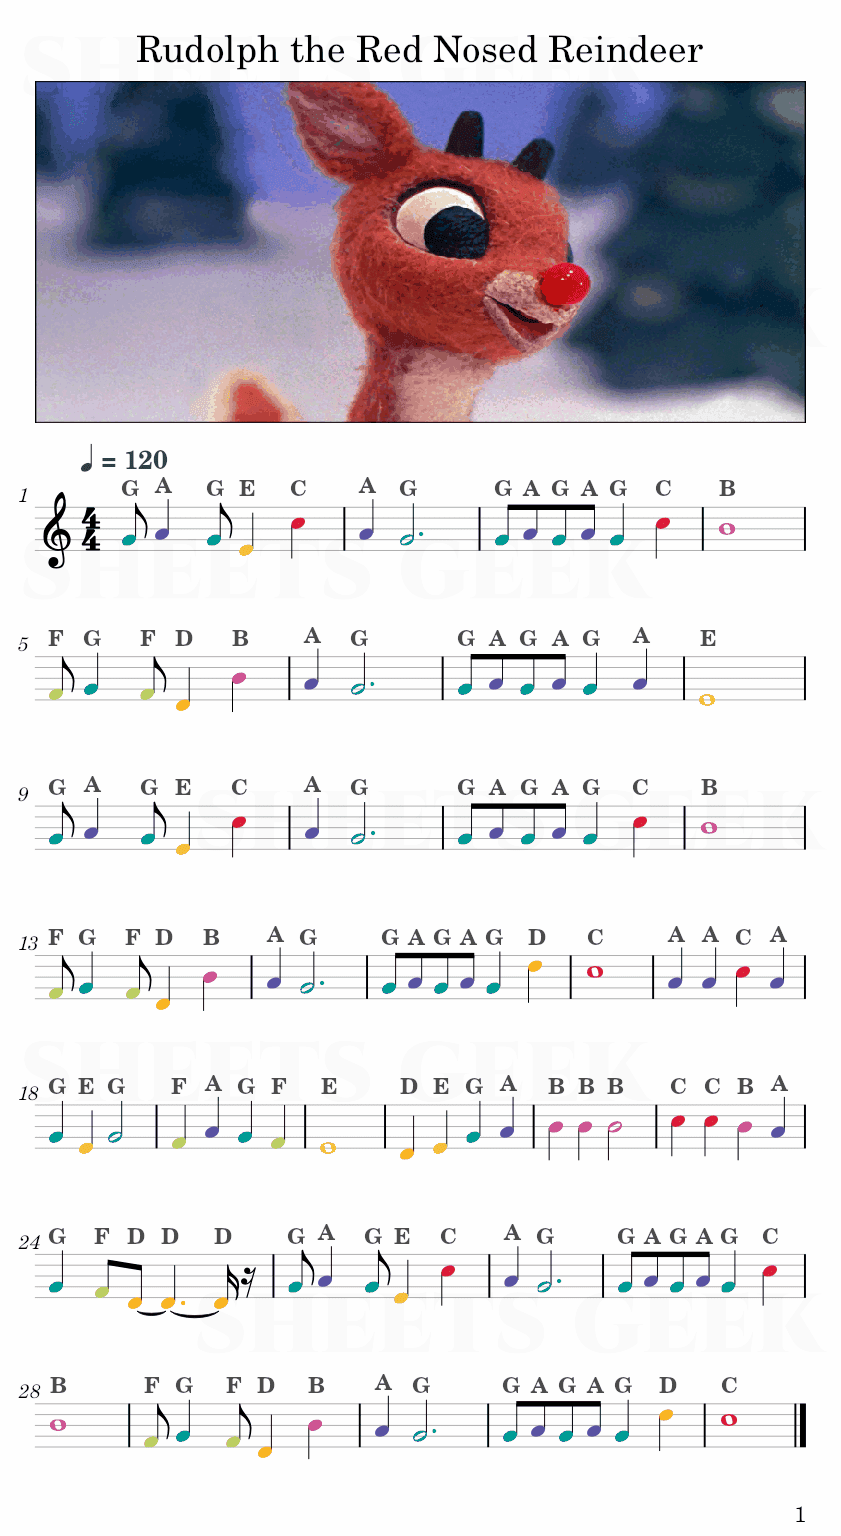 Rudolph the Red Nosed Reindeer Easy Sheet Music Free for piano, keyboard, flute, violin, sax, cello page 1